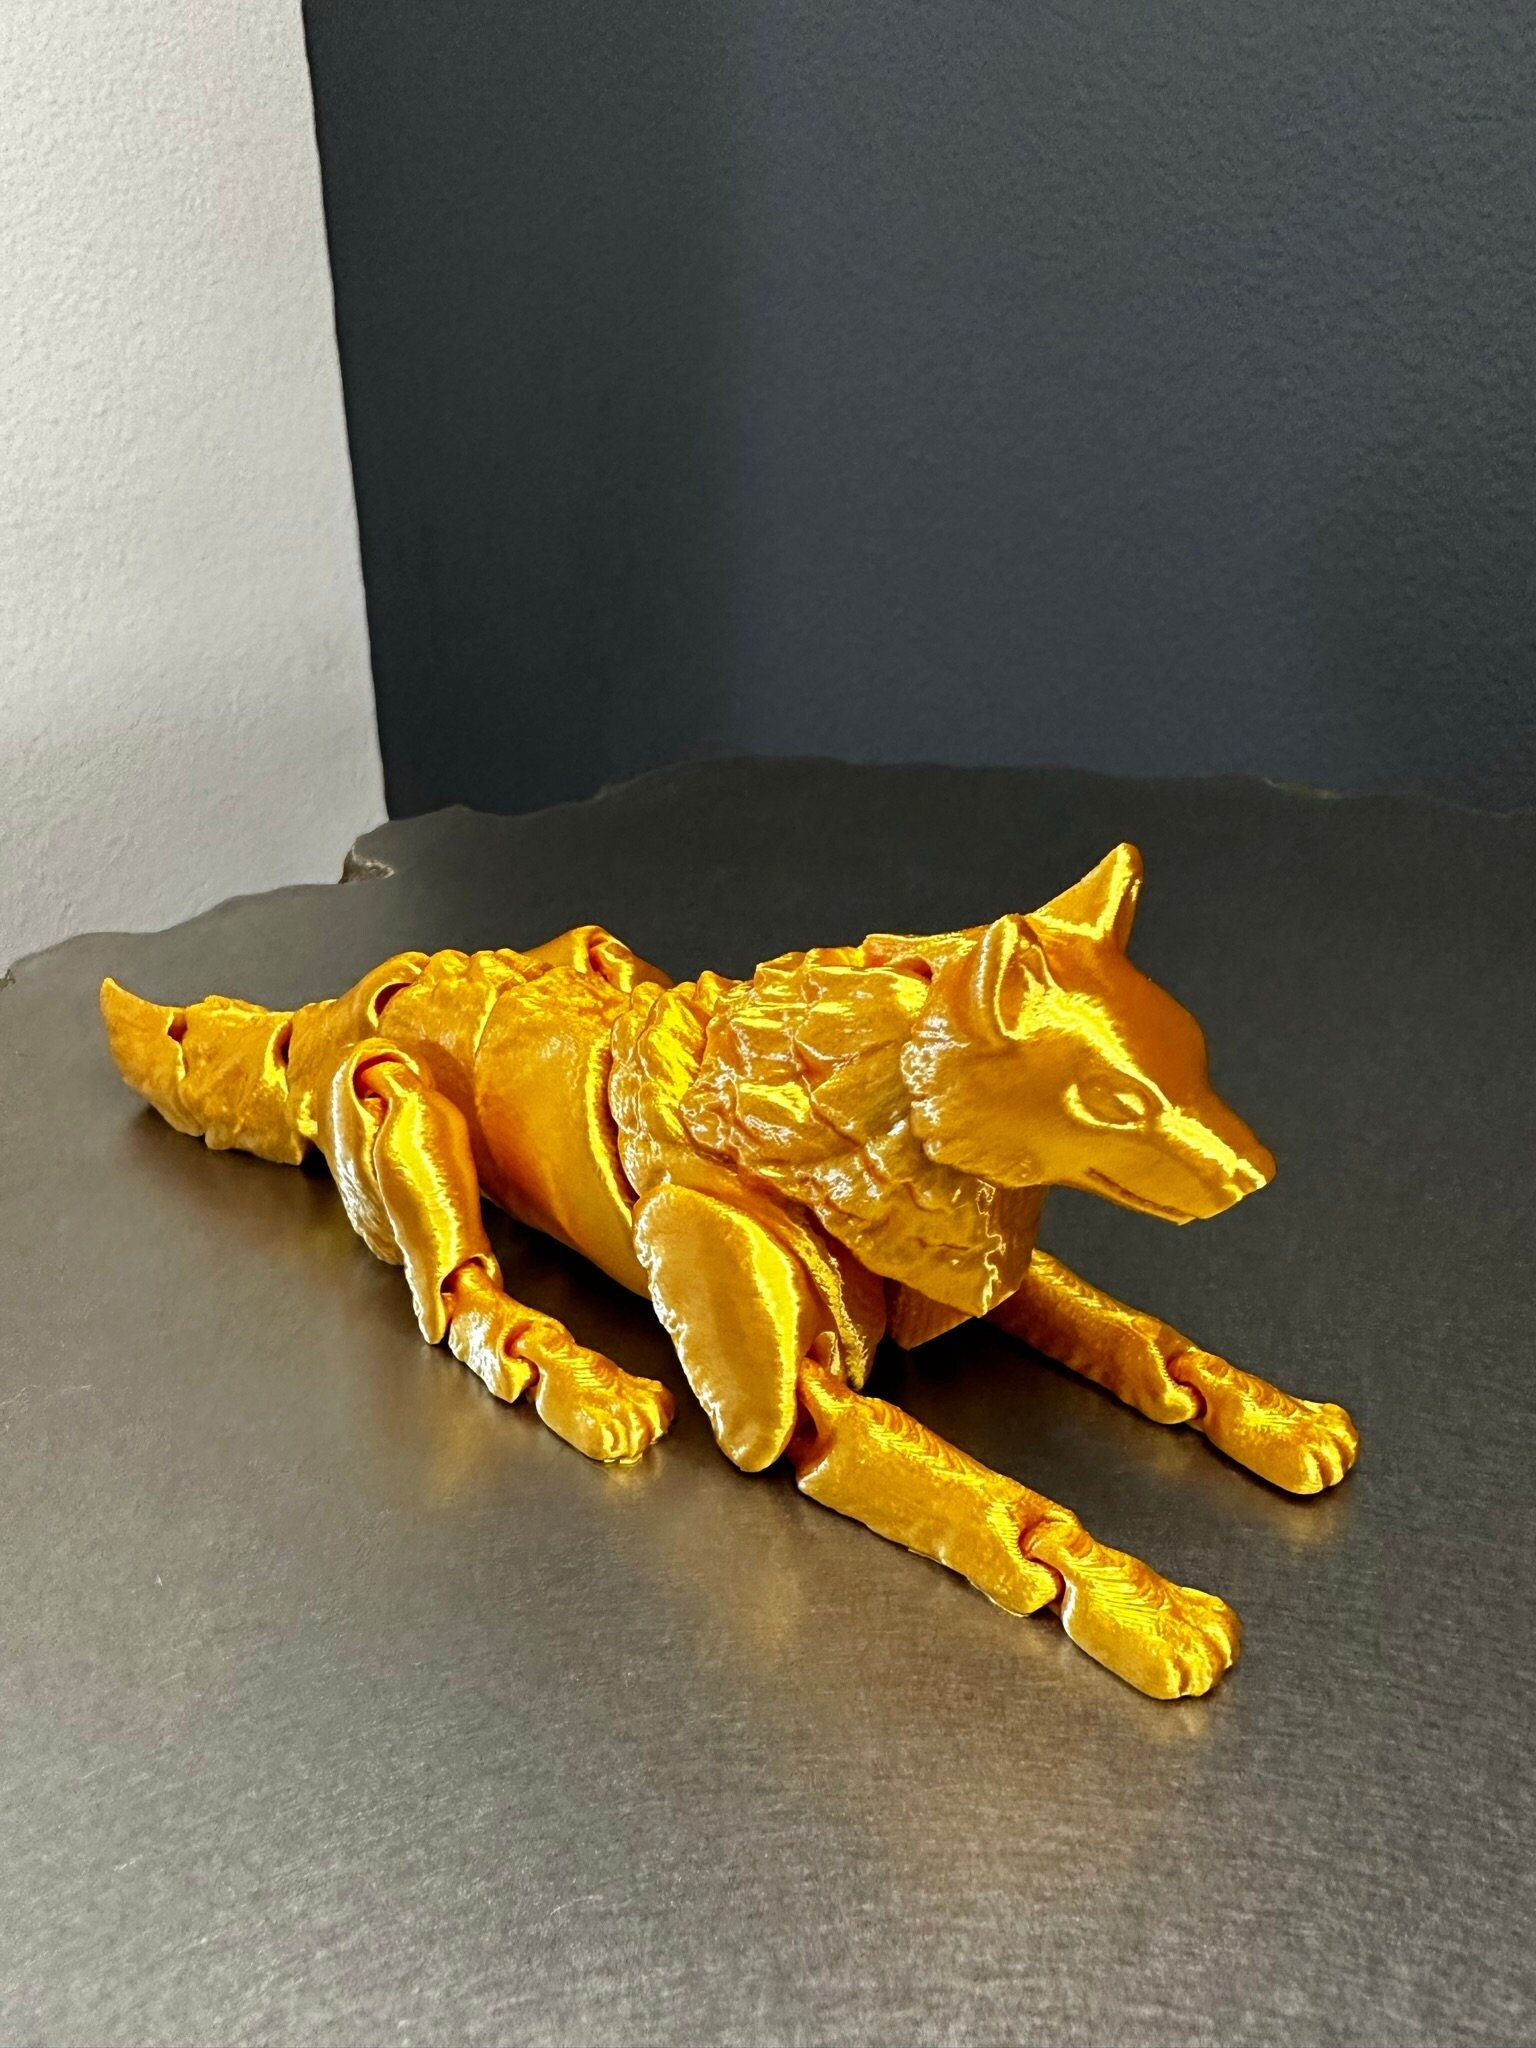 Articulated 3D printed wolf, fidget toy, desk toy, flexi animal